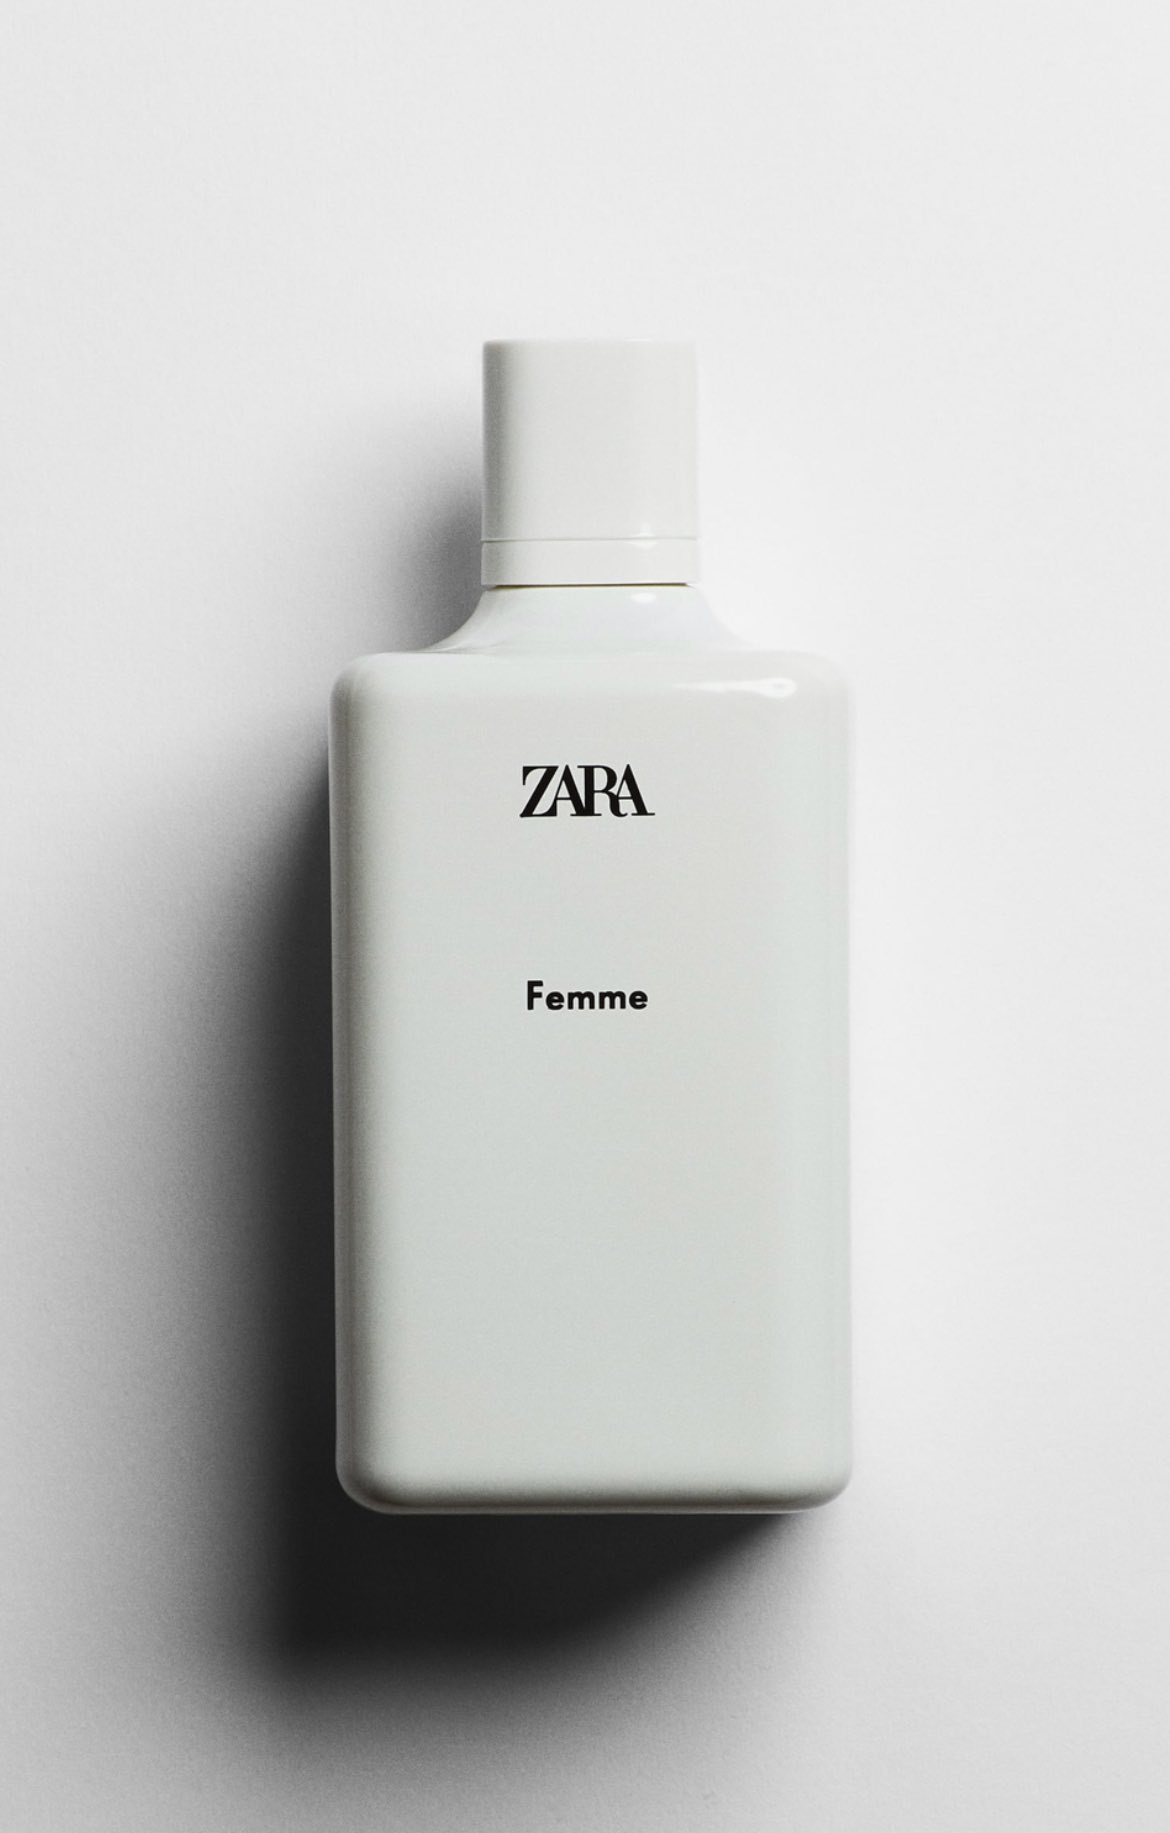 Zara Femme, is it a dupe for Hypnotic Poison? 